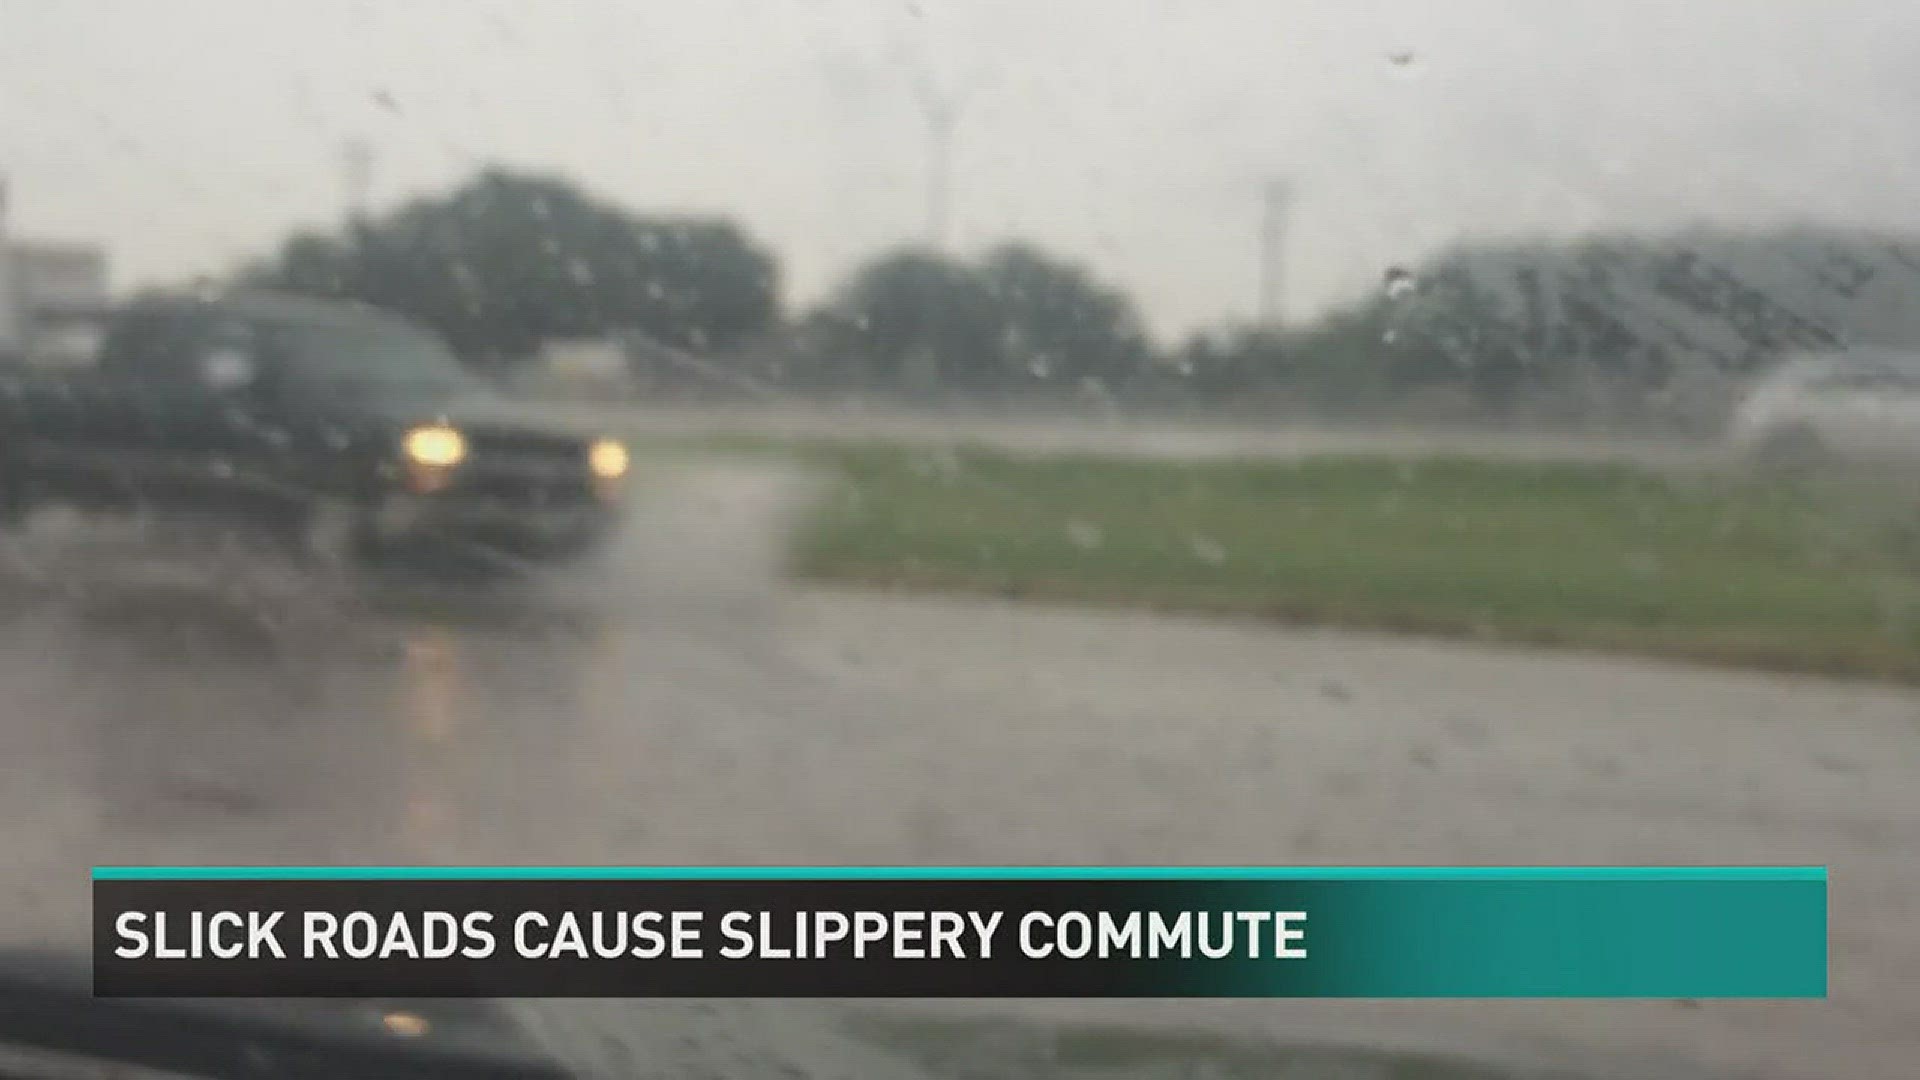 Our wet weather is bringing more than just rain, it's also creating slick roads.